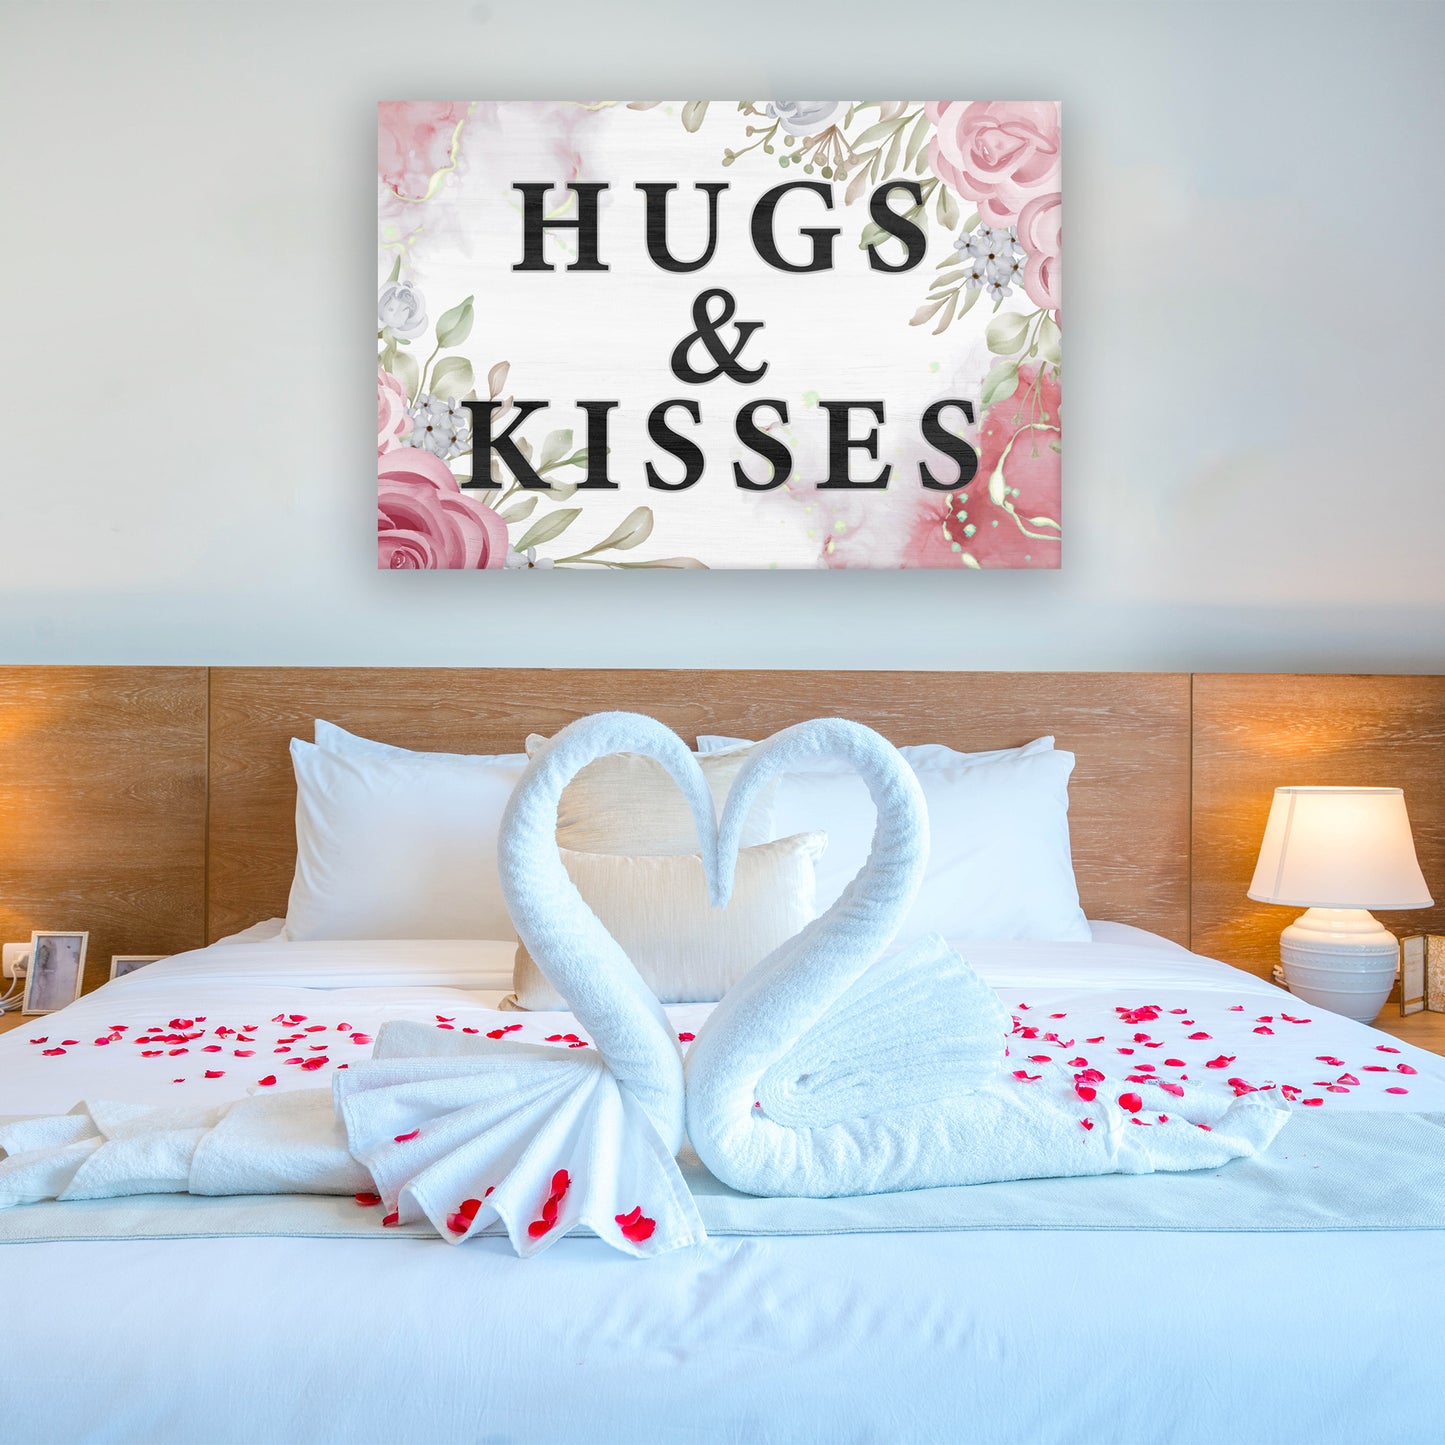 Valentine Saying Sign - Image by Tailored Canvases